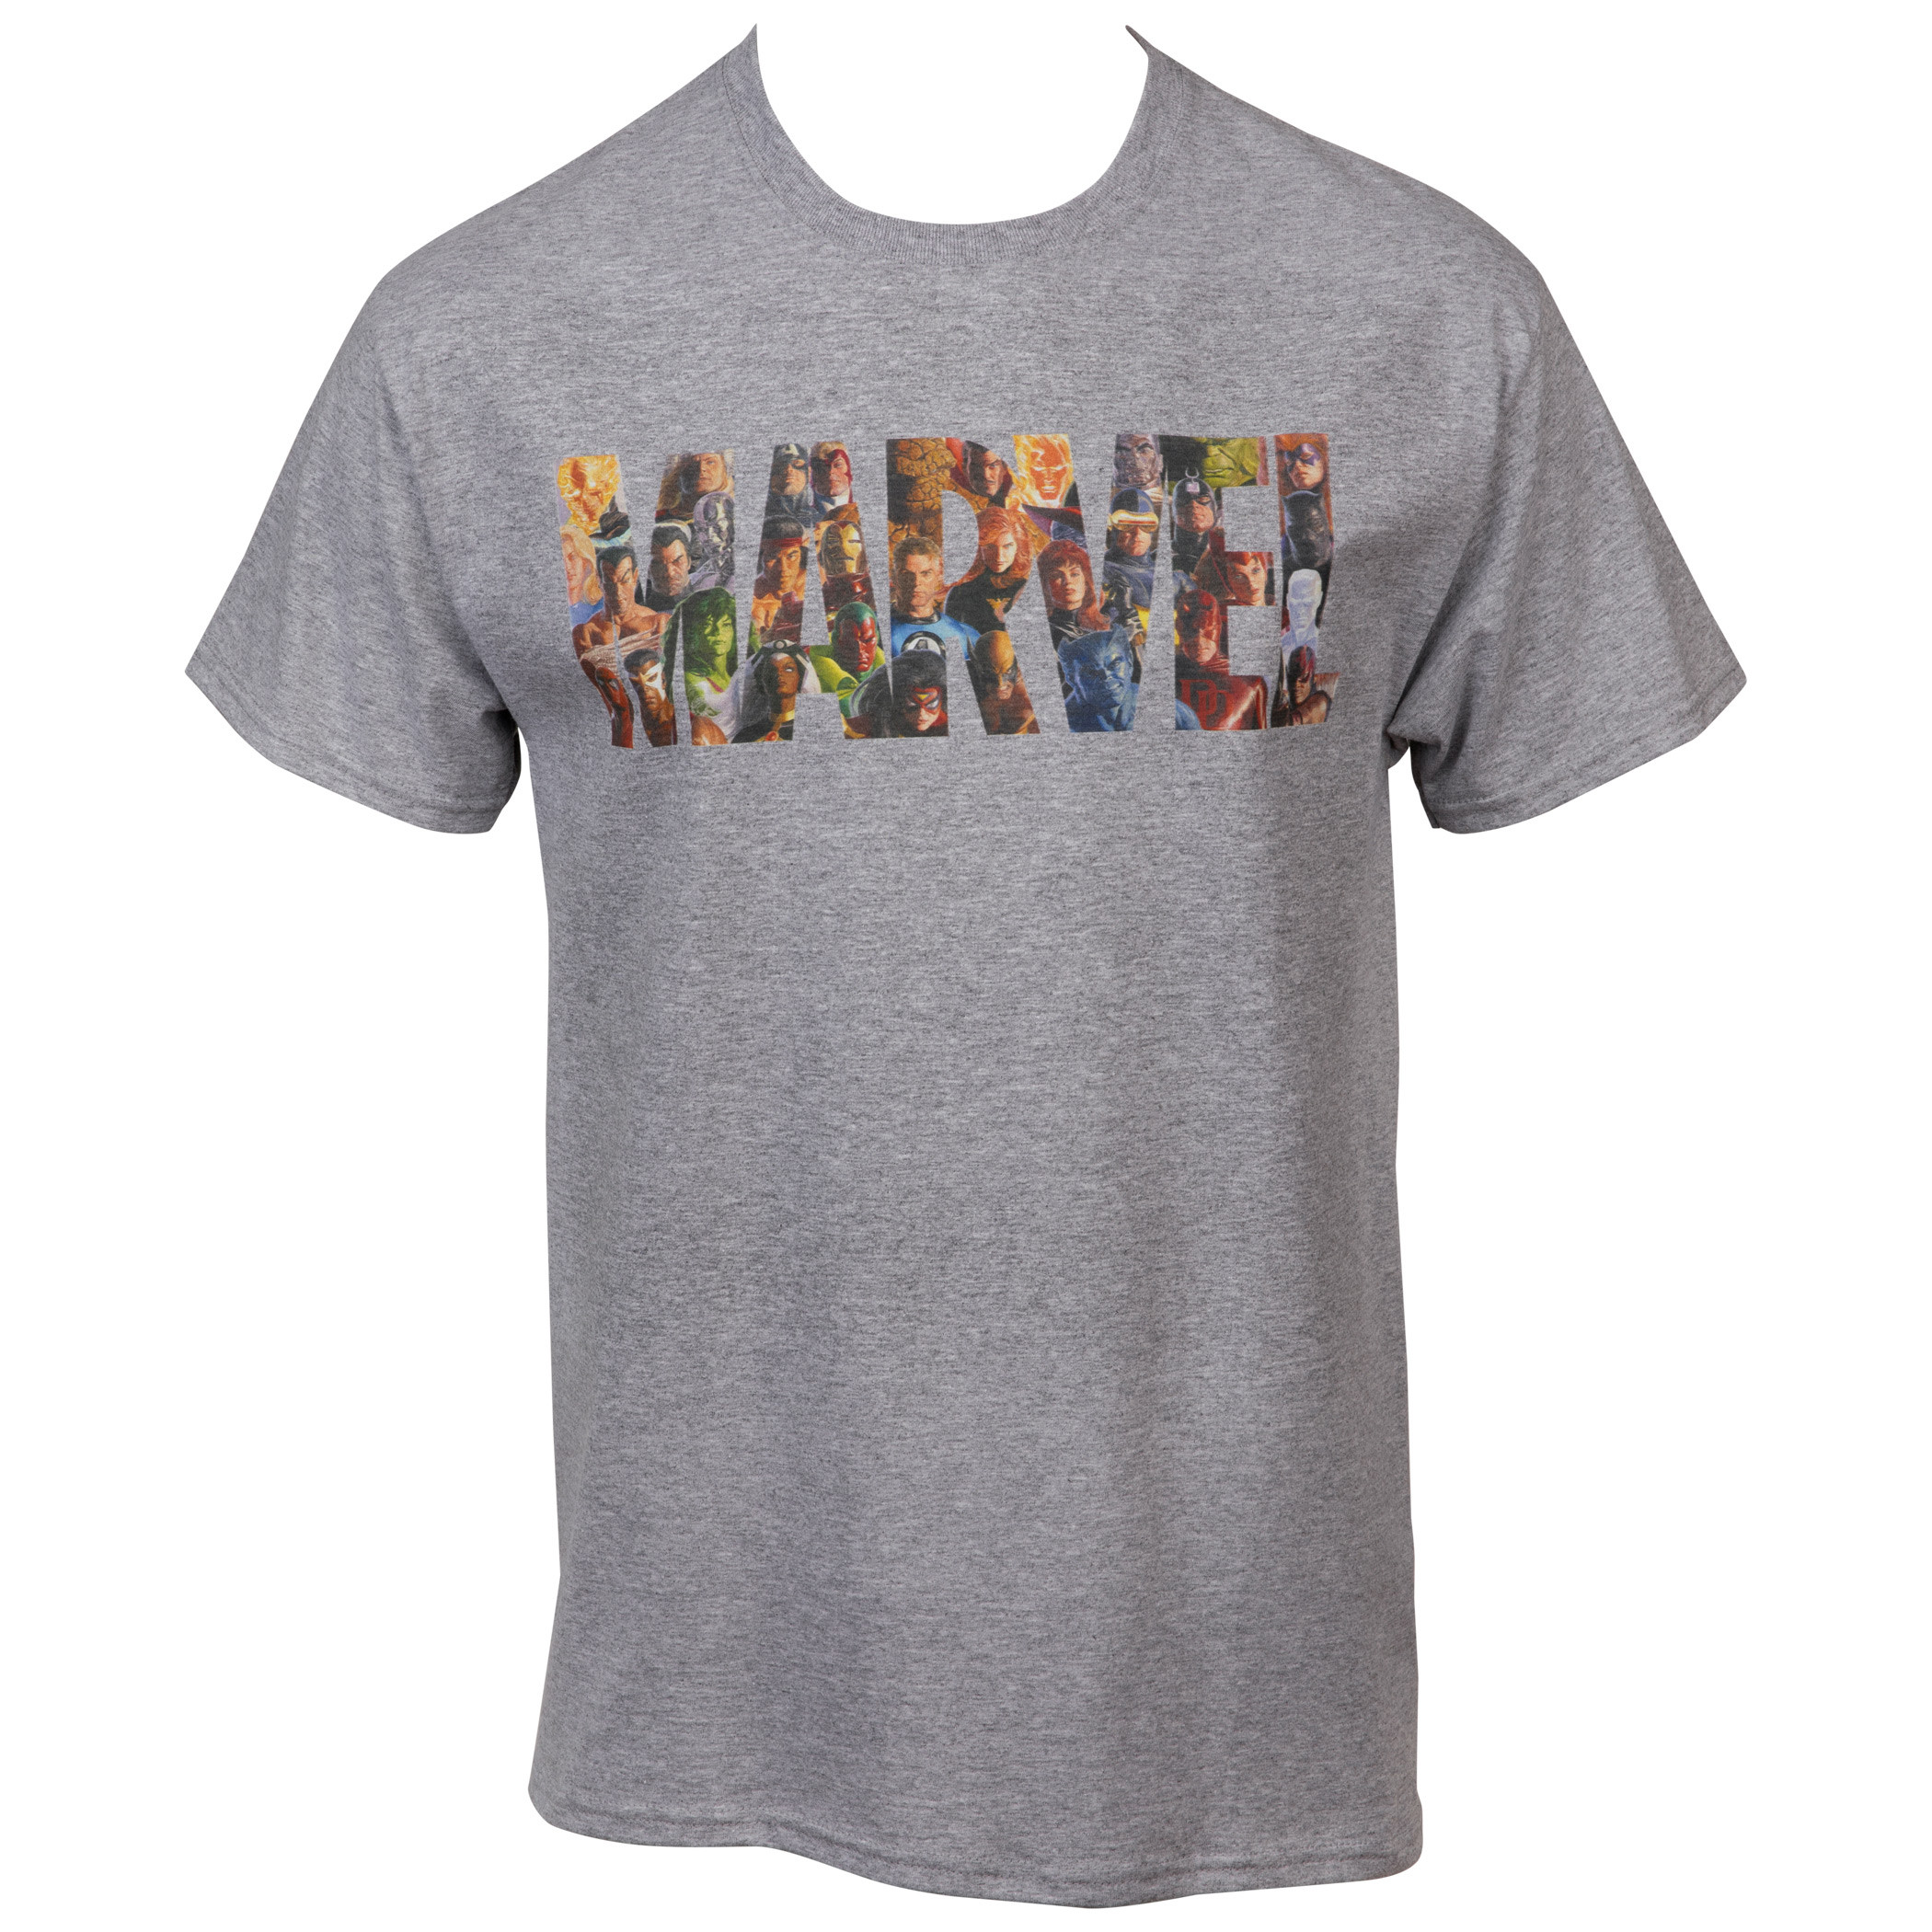 Marvel Comics Text Brand Made Up of Heroes T-Shirt